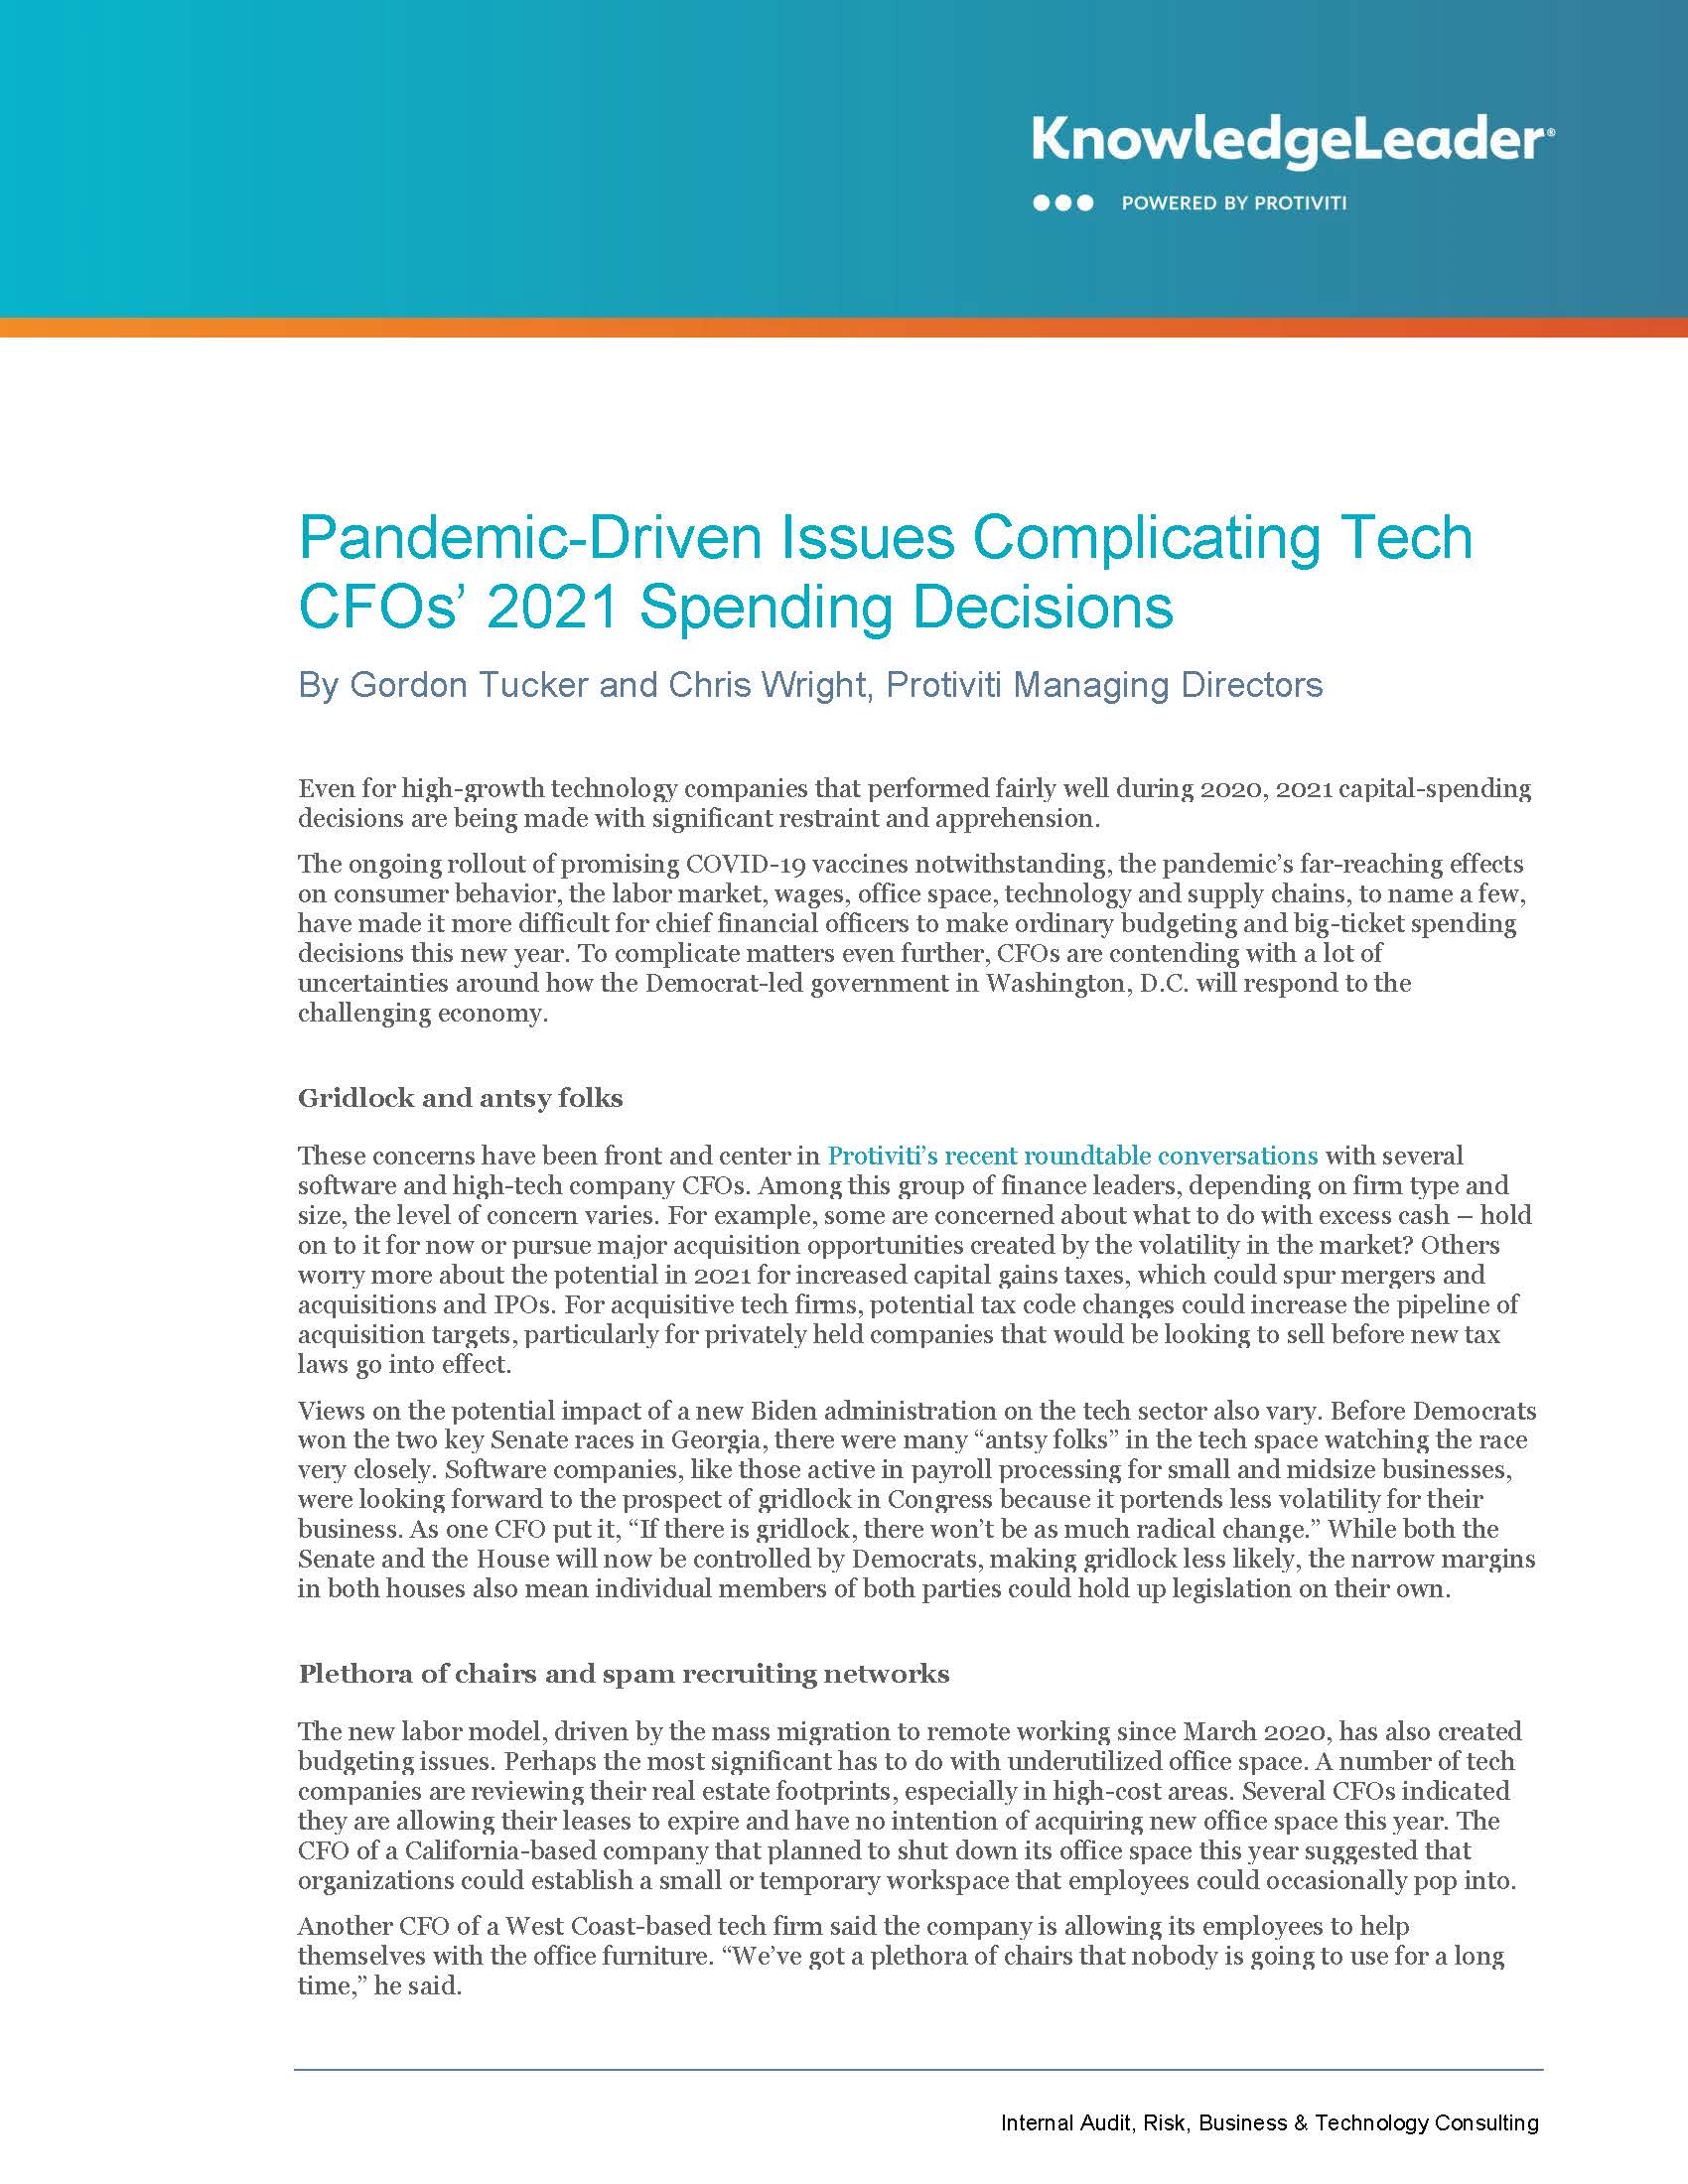 Screenshot of the first page of Pandemic-Driven Issues Complicating Tech CFOs’ 2021 Spending Decisions